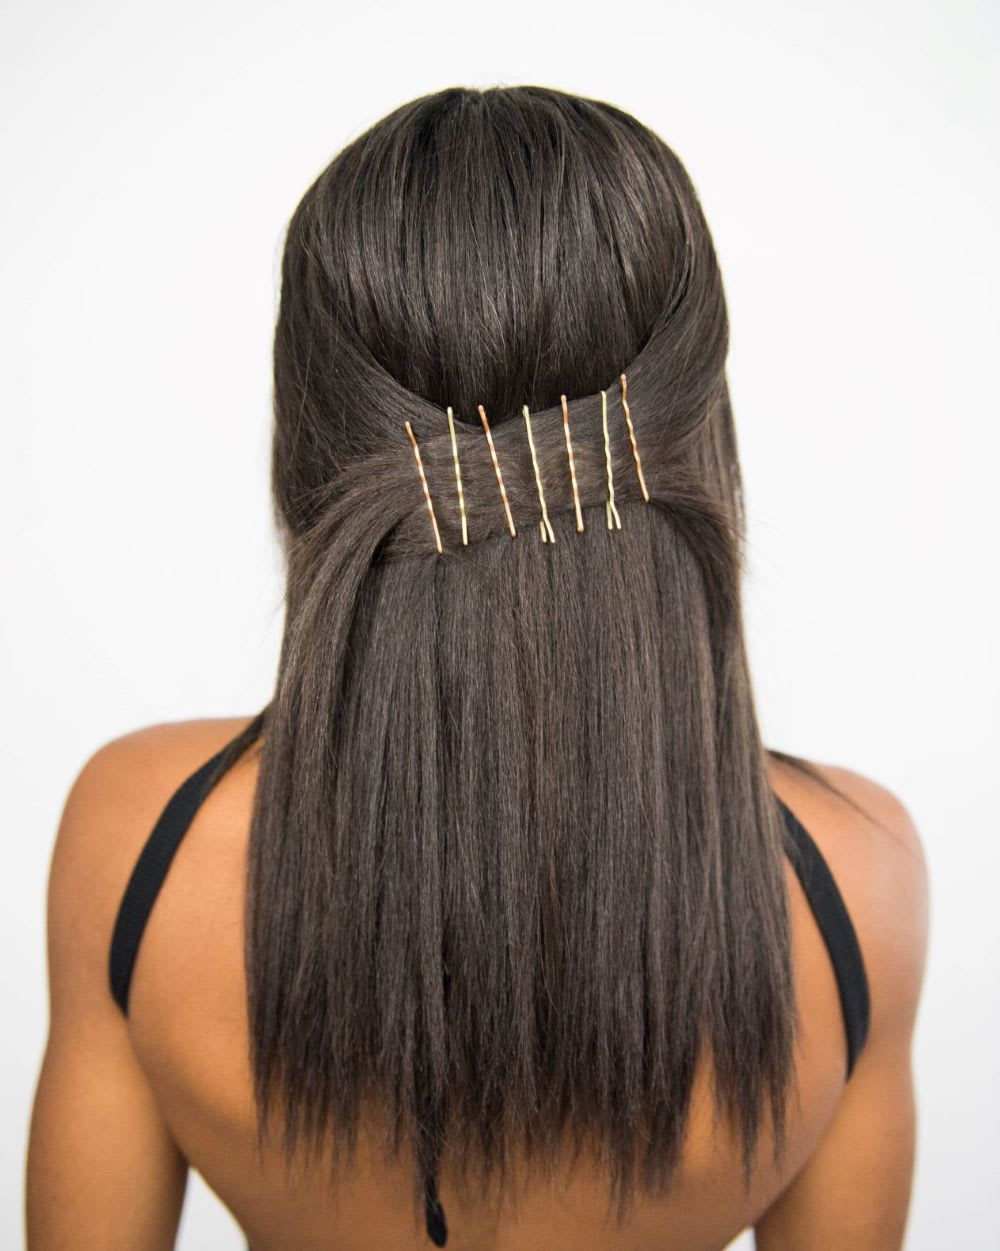 How to Wear the Bobby Pin Hairstyle Trend - Lulus.com Fashion Blog